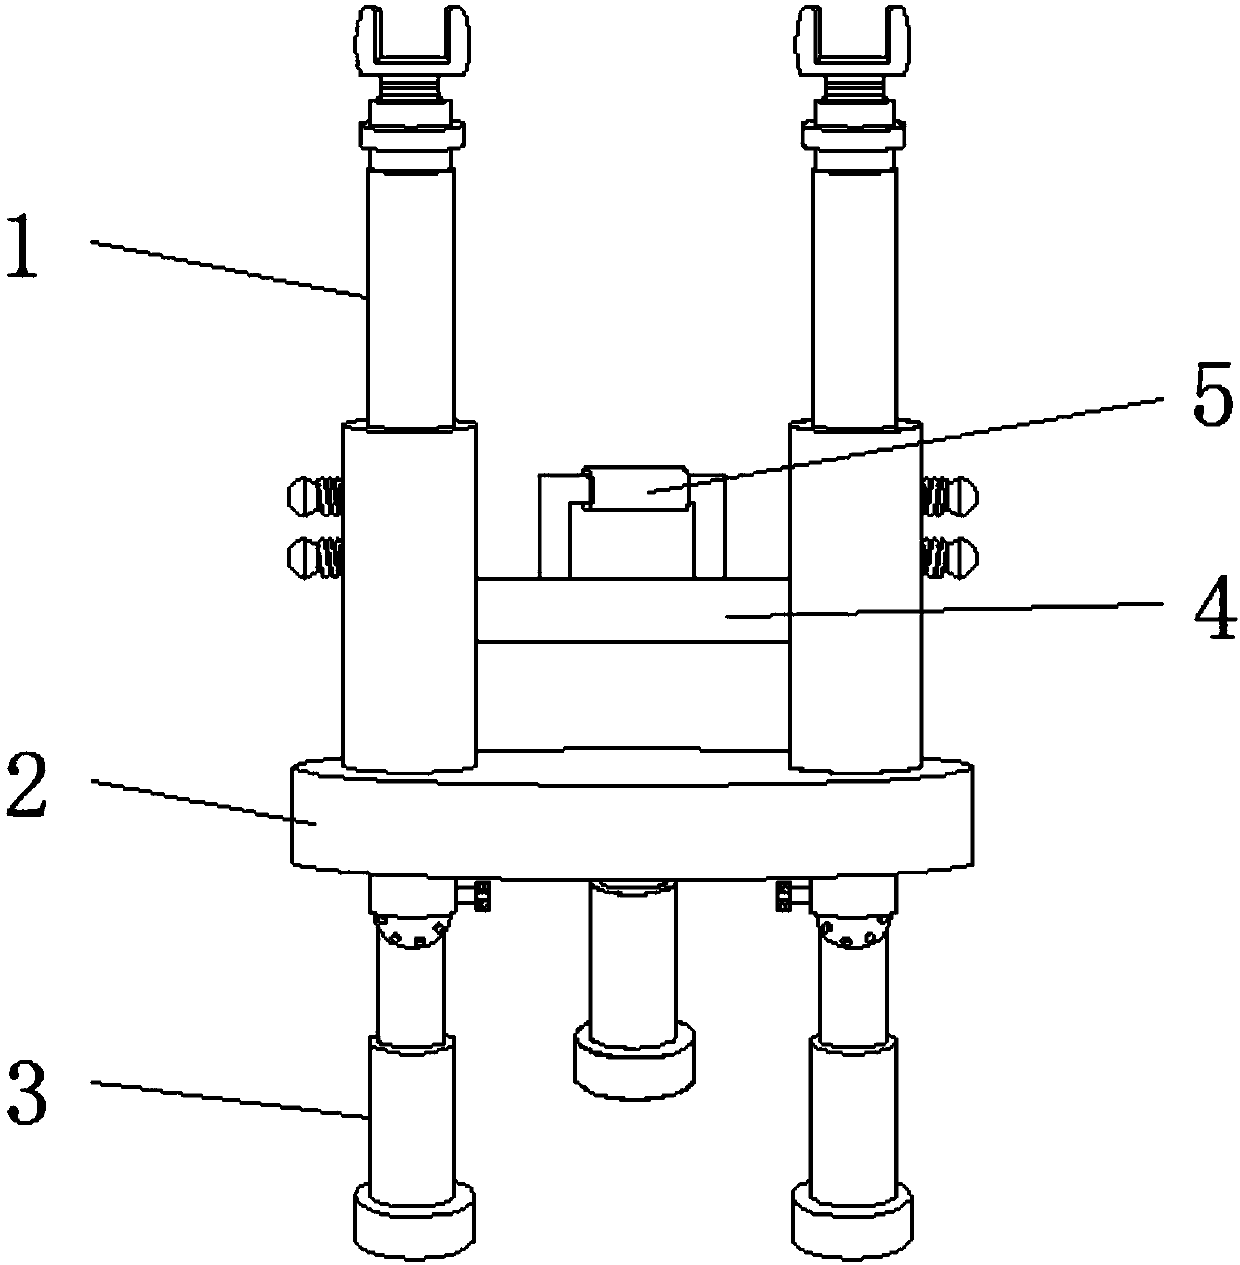 Supporting frame for branches and stems of grapefruit tree